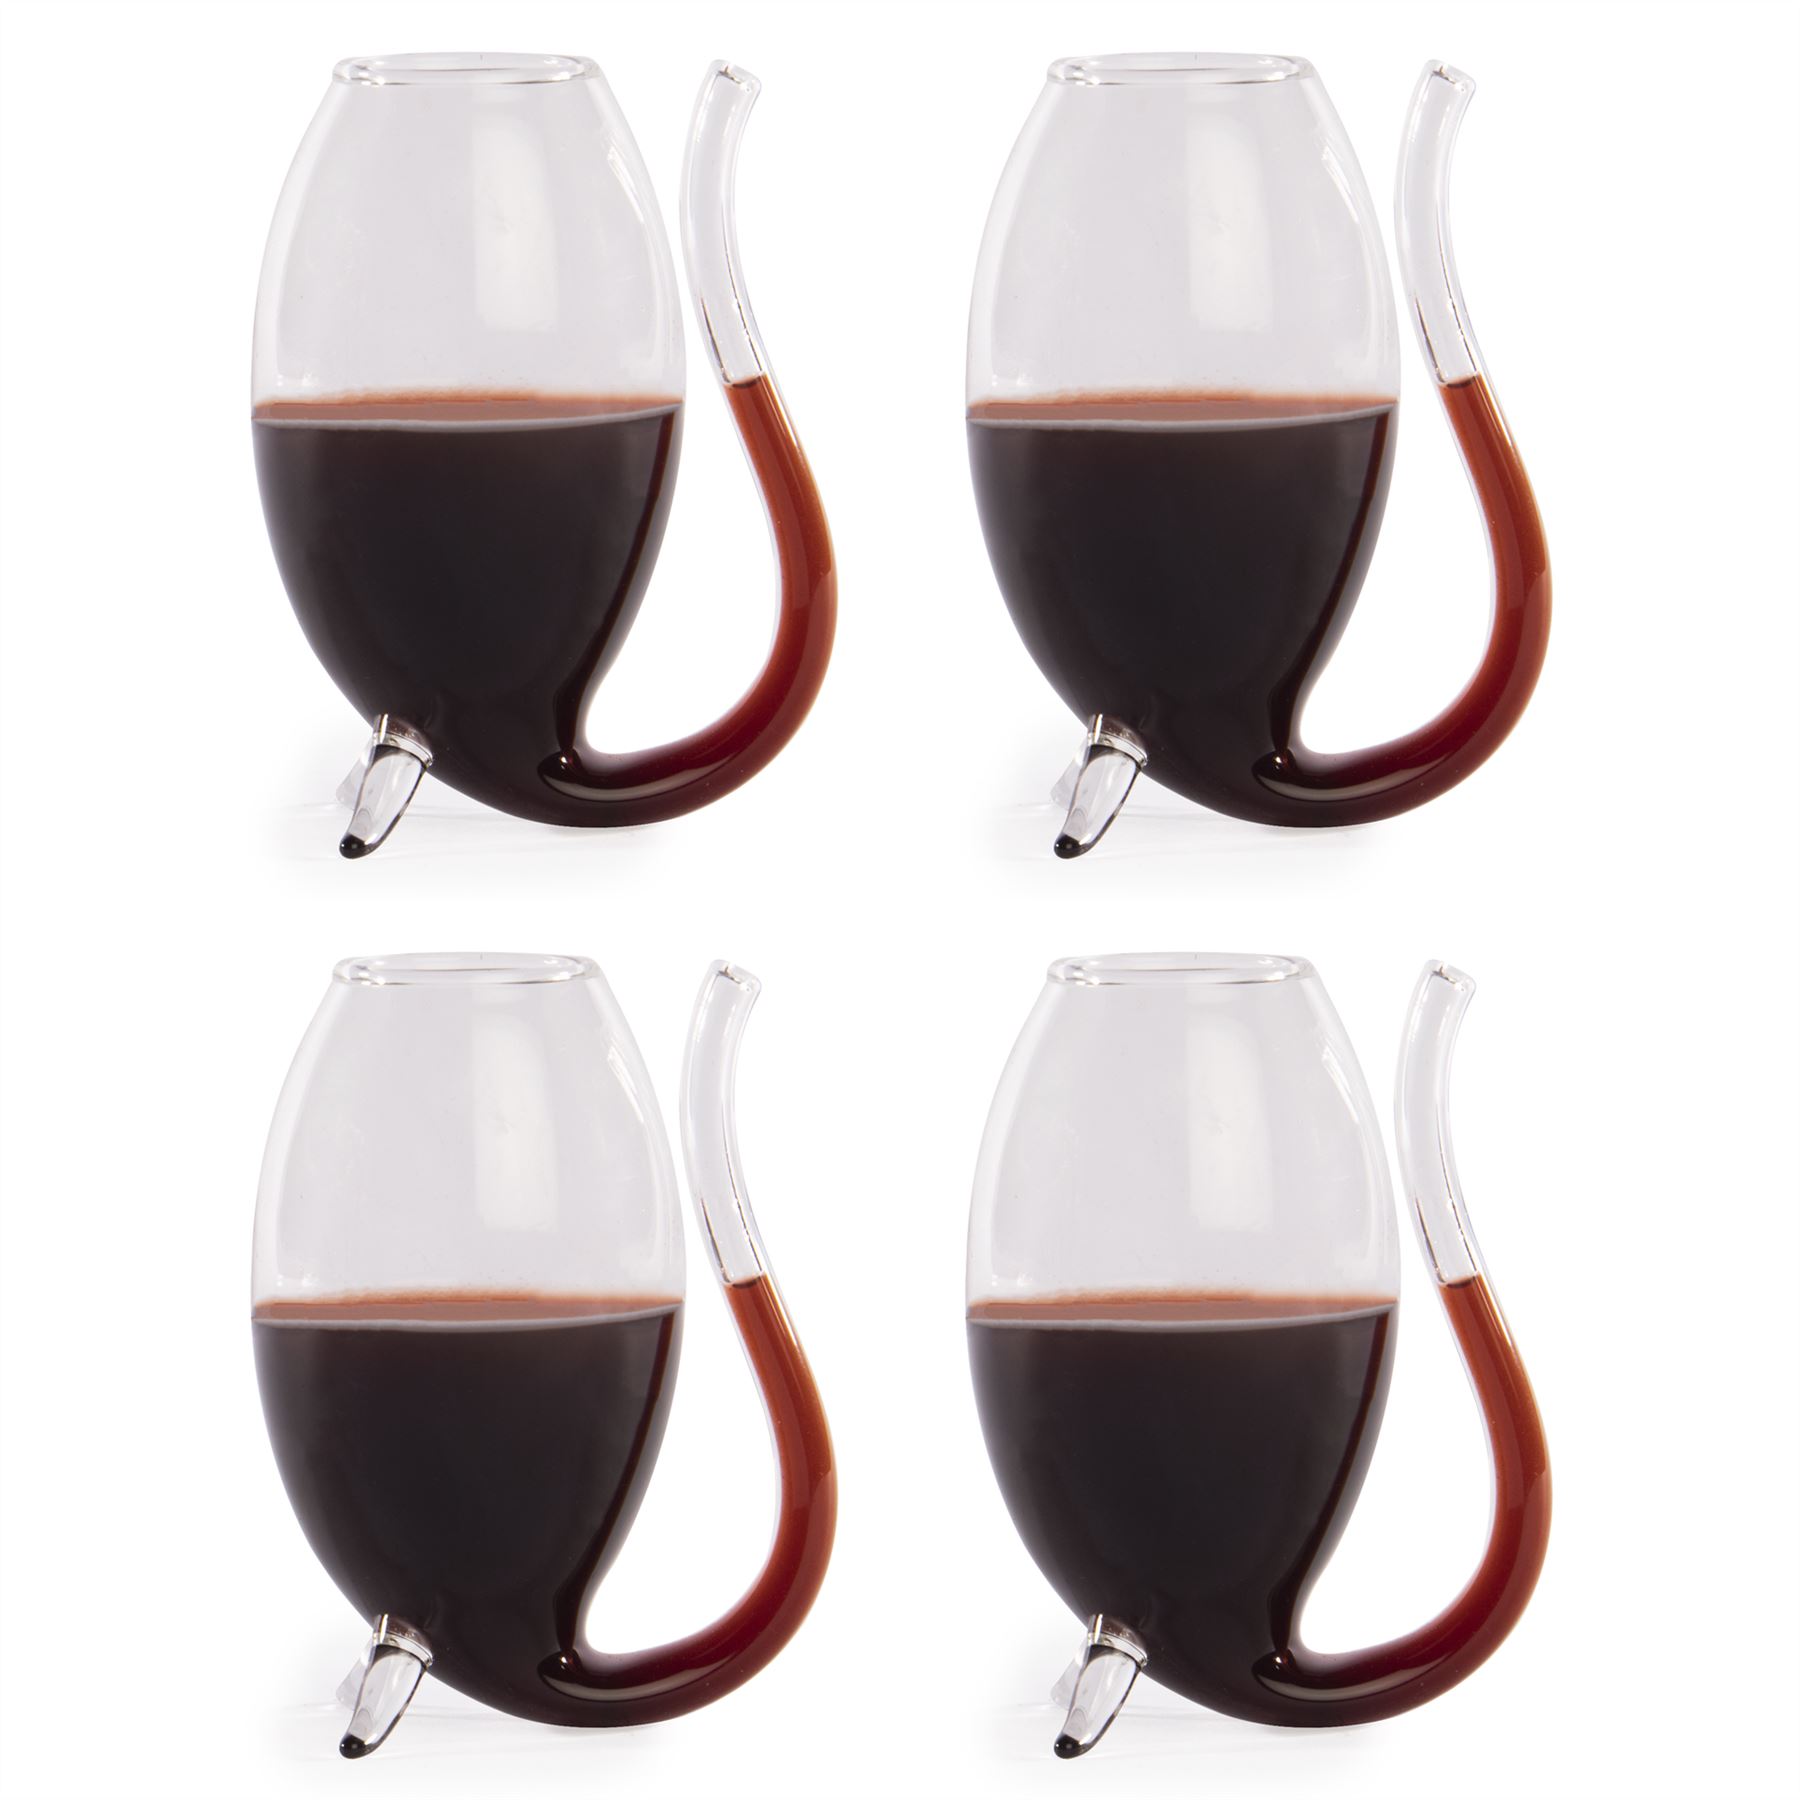 Port Sippers 90ml - Set of 4 | M&W